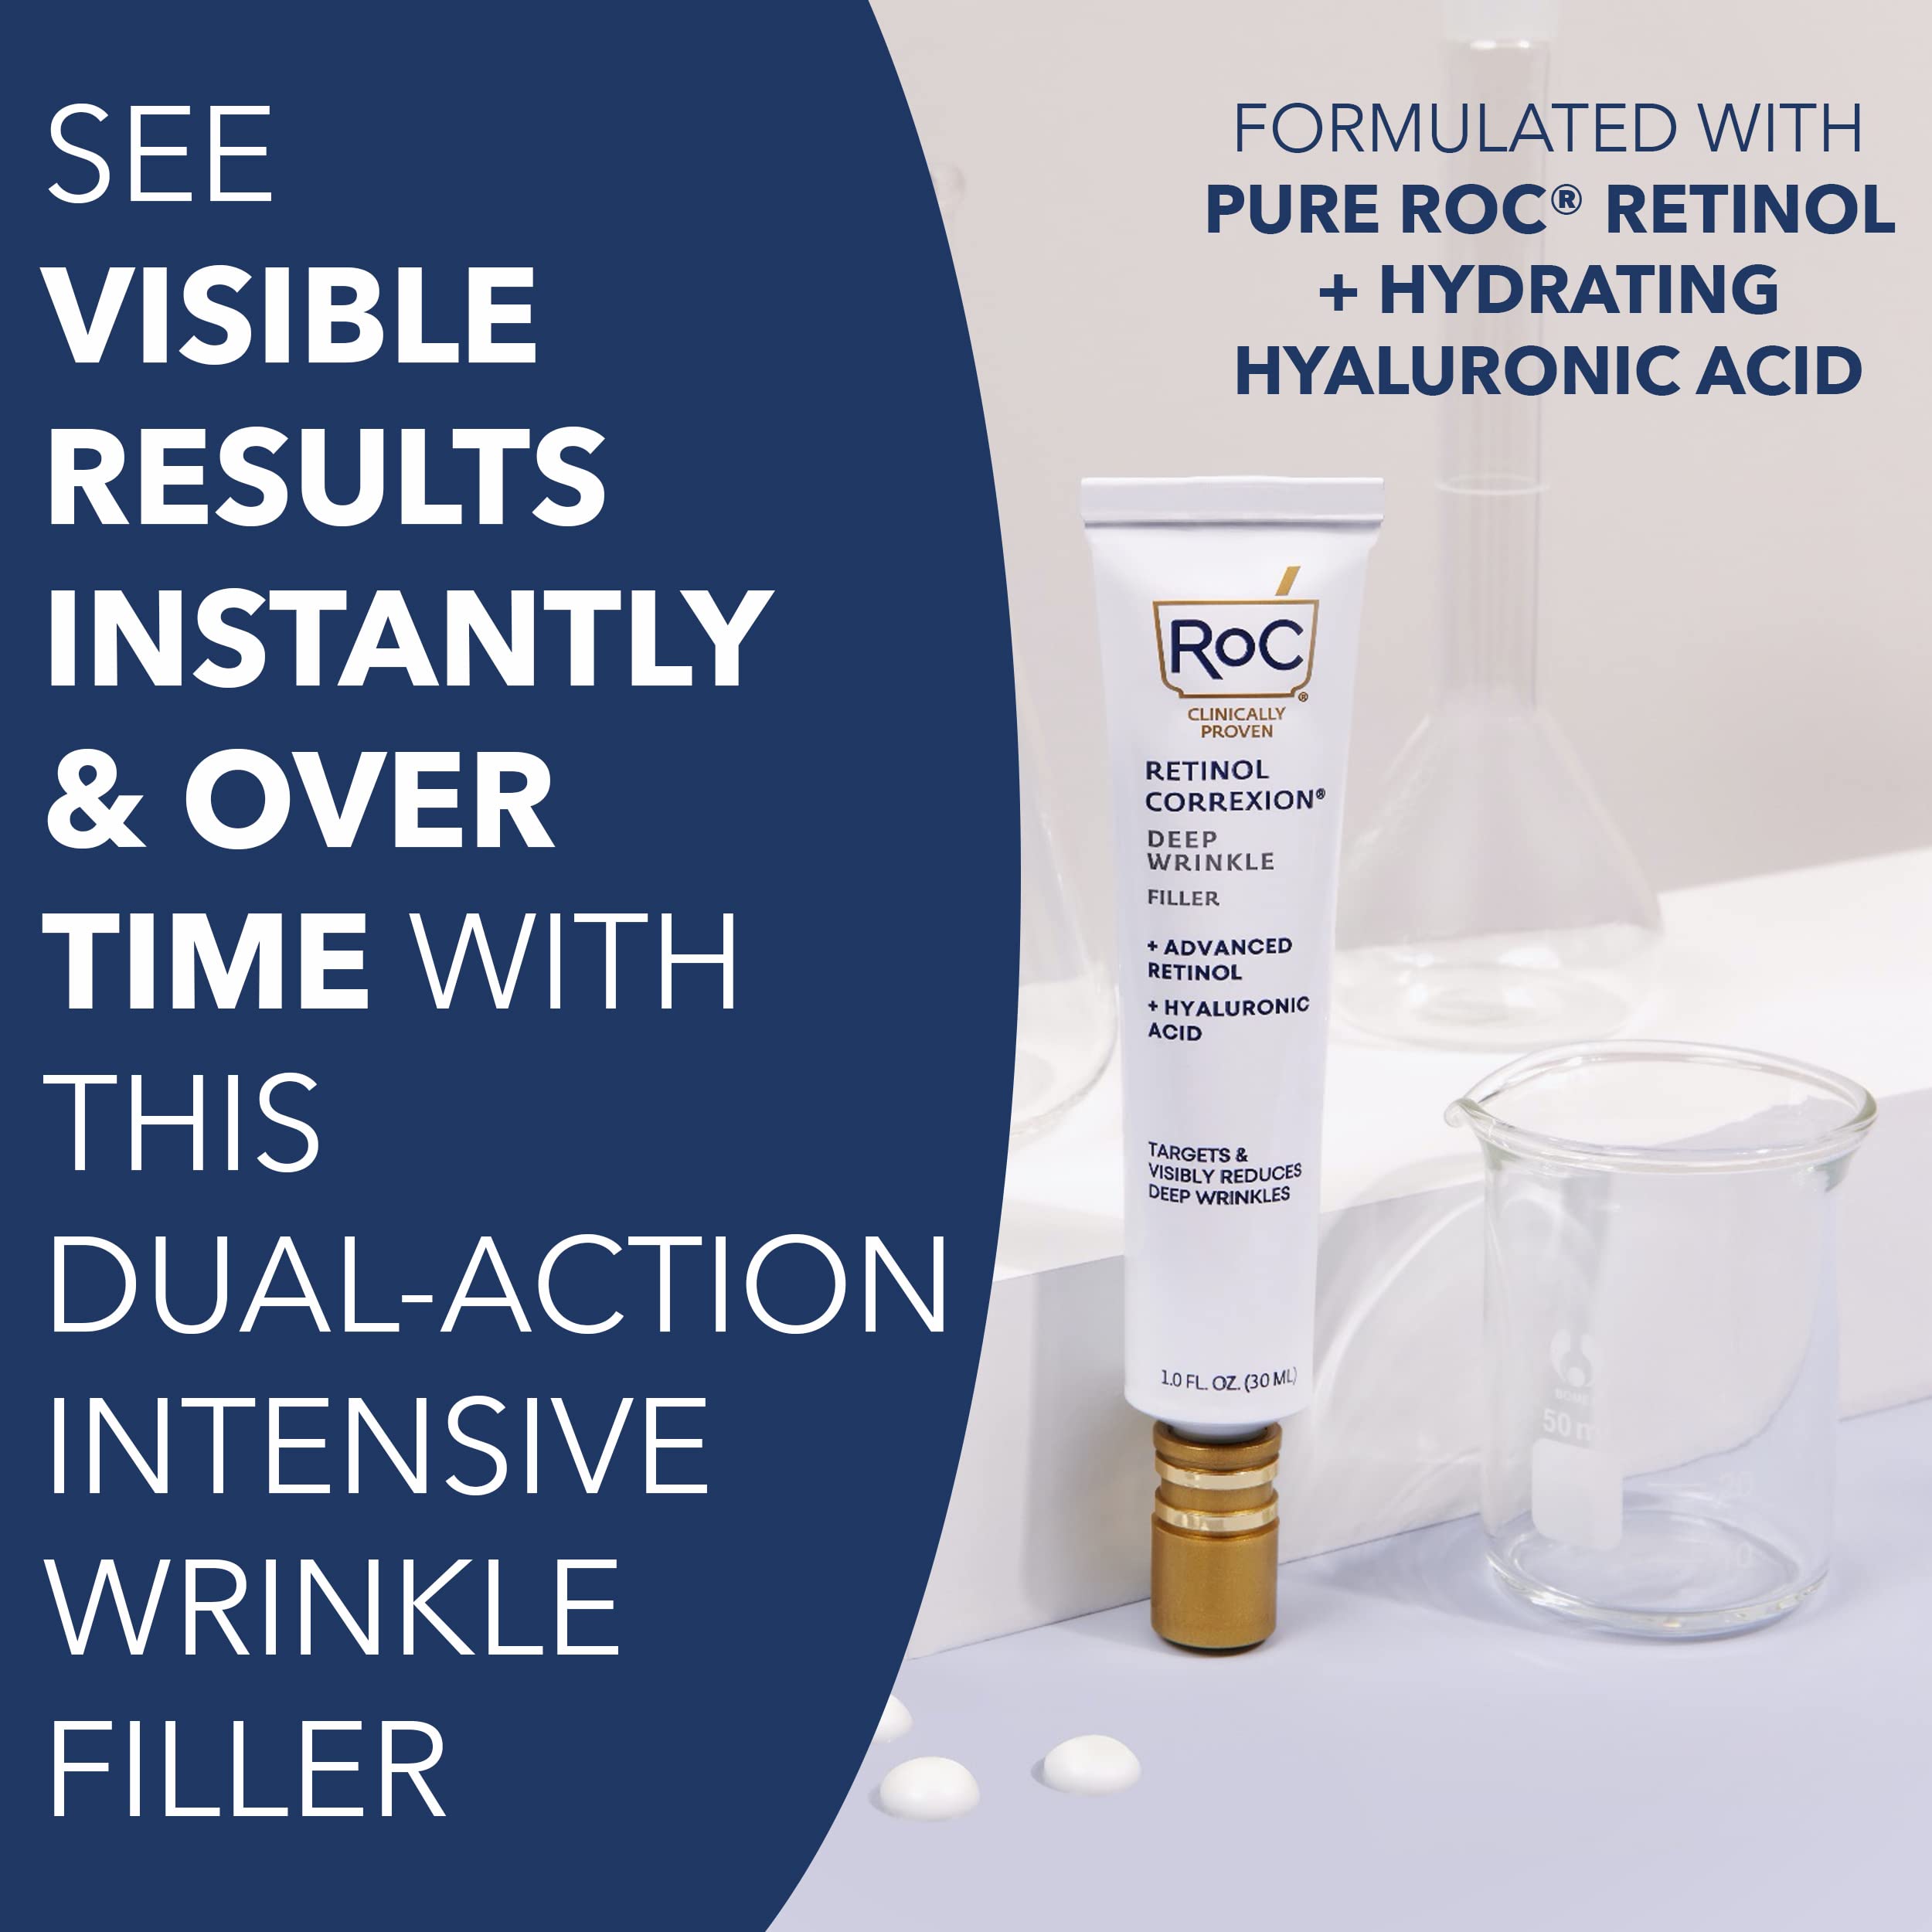 RoC, Retinol Correxion Deep Wrinkle Facial Filler with Hyaluronic Acid Retinol Ounce, 1 Fl Oz (Packaging May Vary)